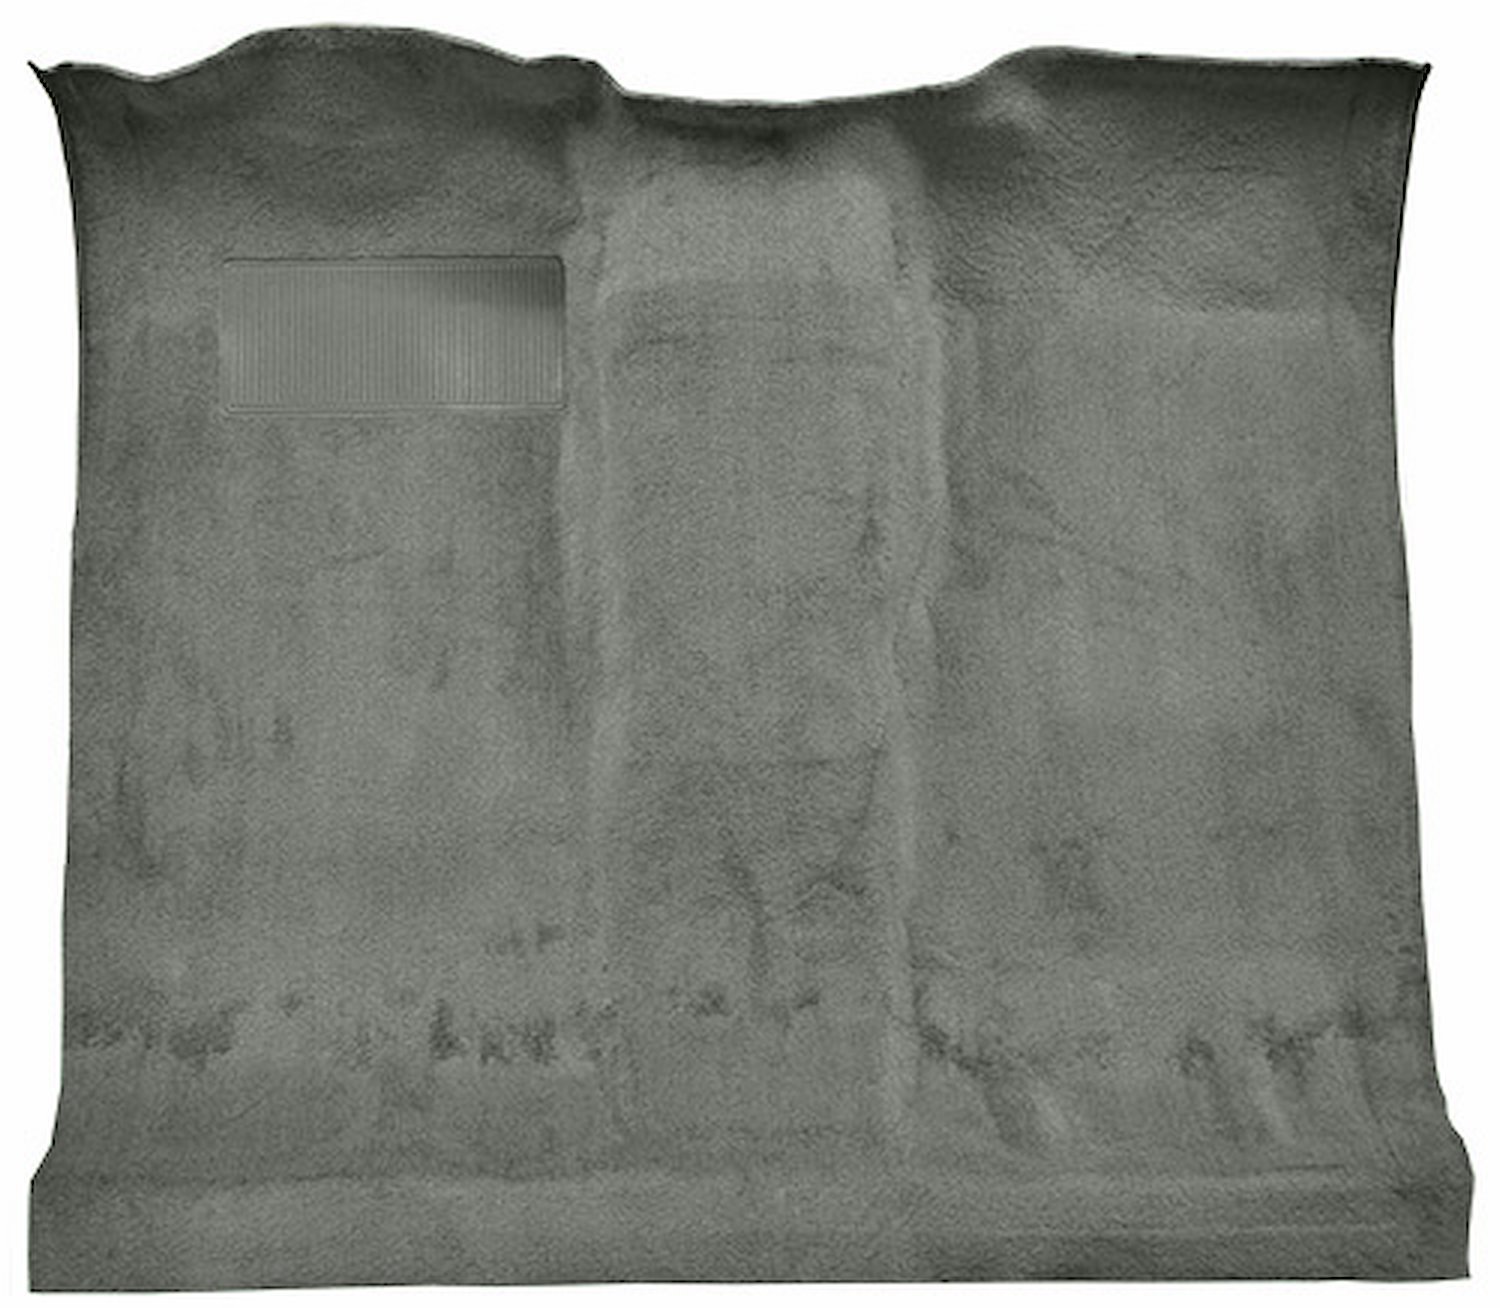 Molded Cut Pile Passenger Area Carpet for 1974-1977 Chevy Blazer, GMC Jimmy [Mass Backing, 1-Piece, Silver]